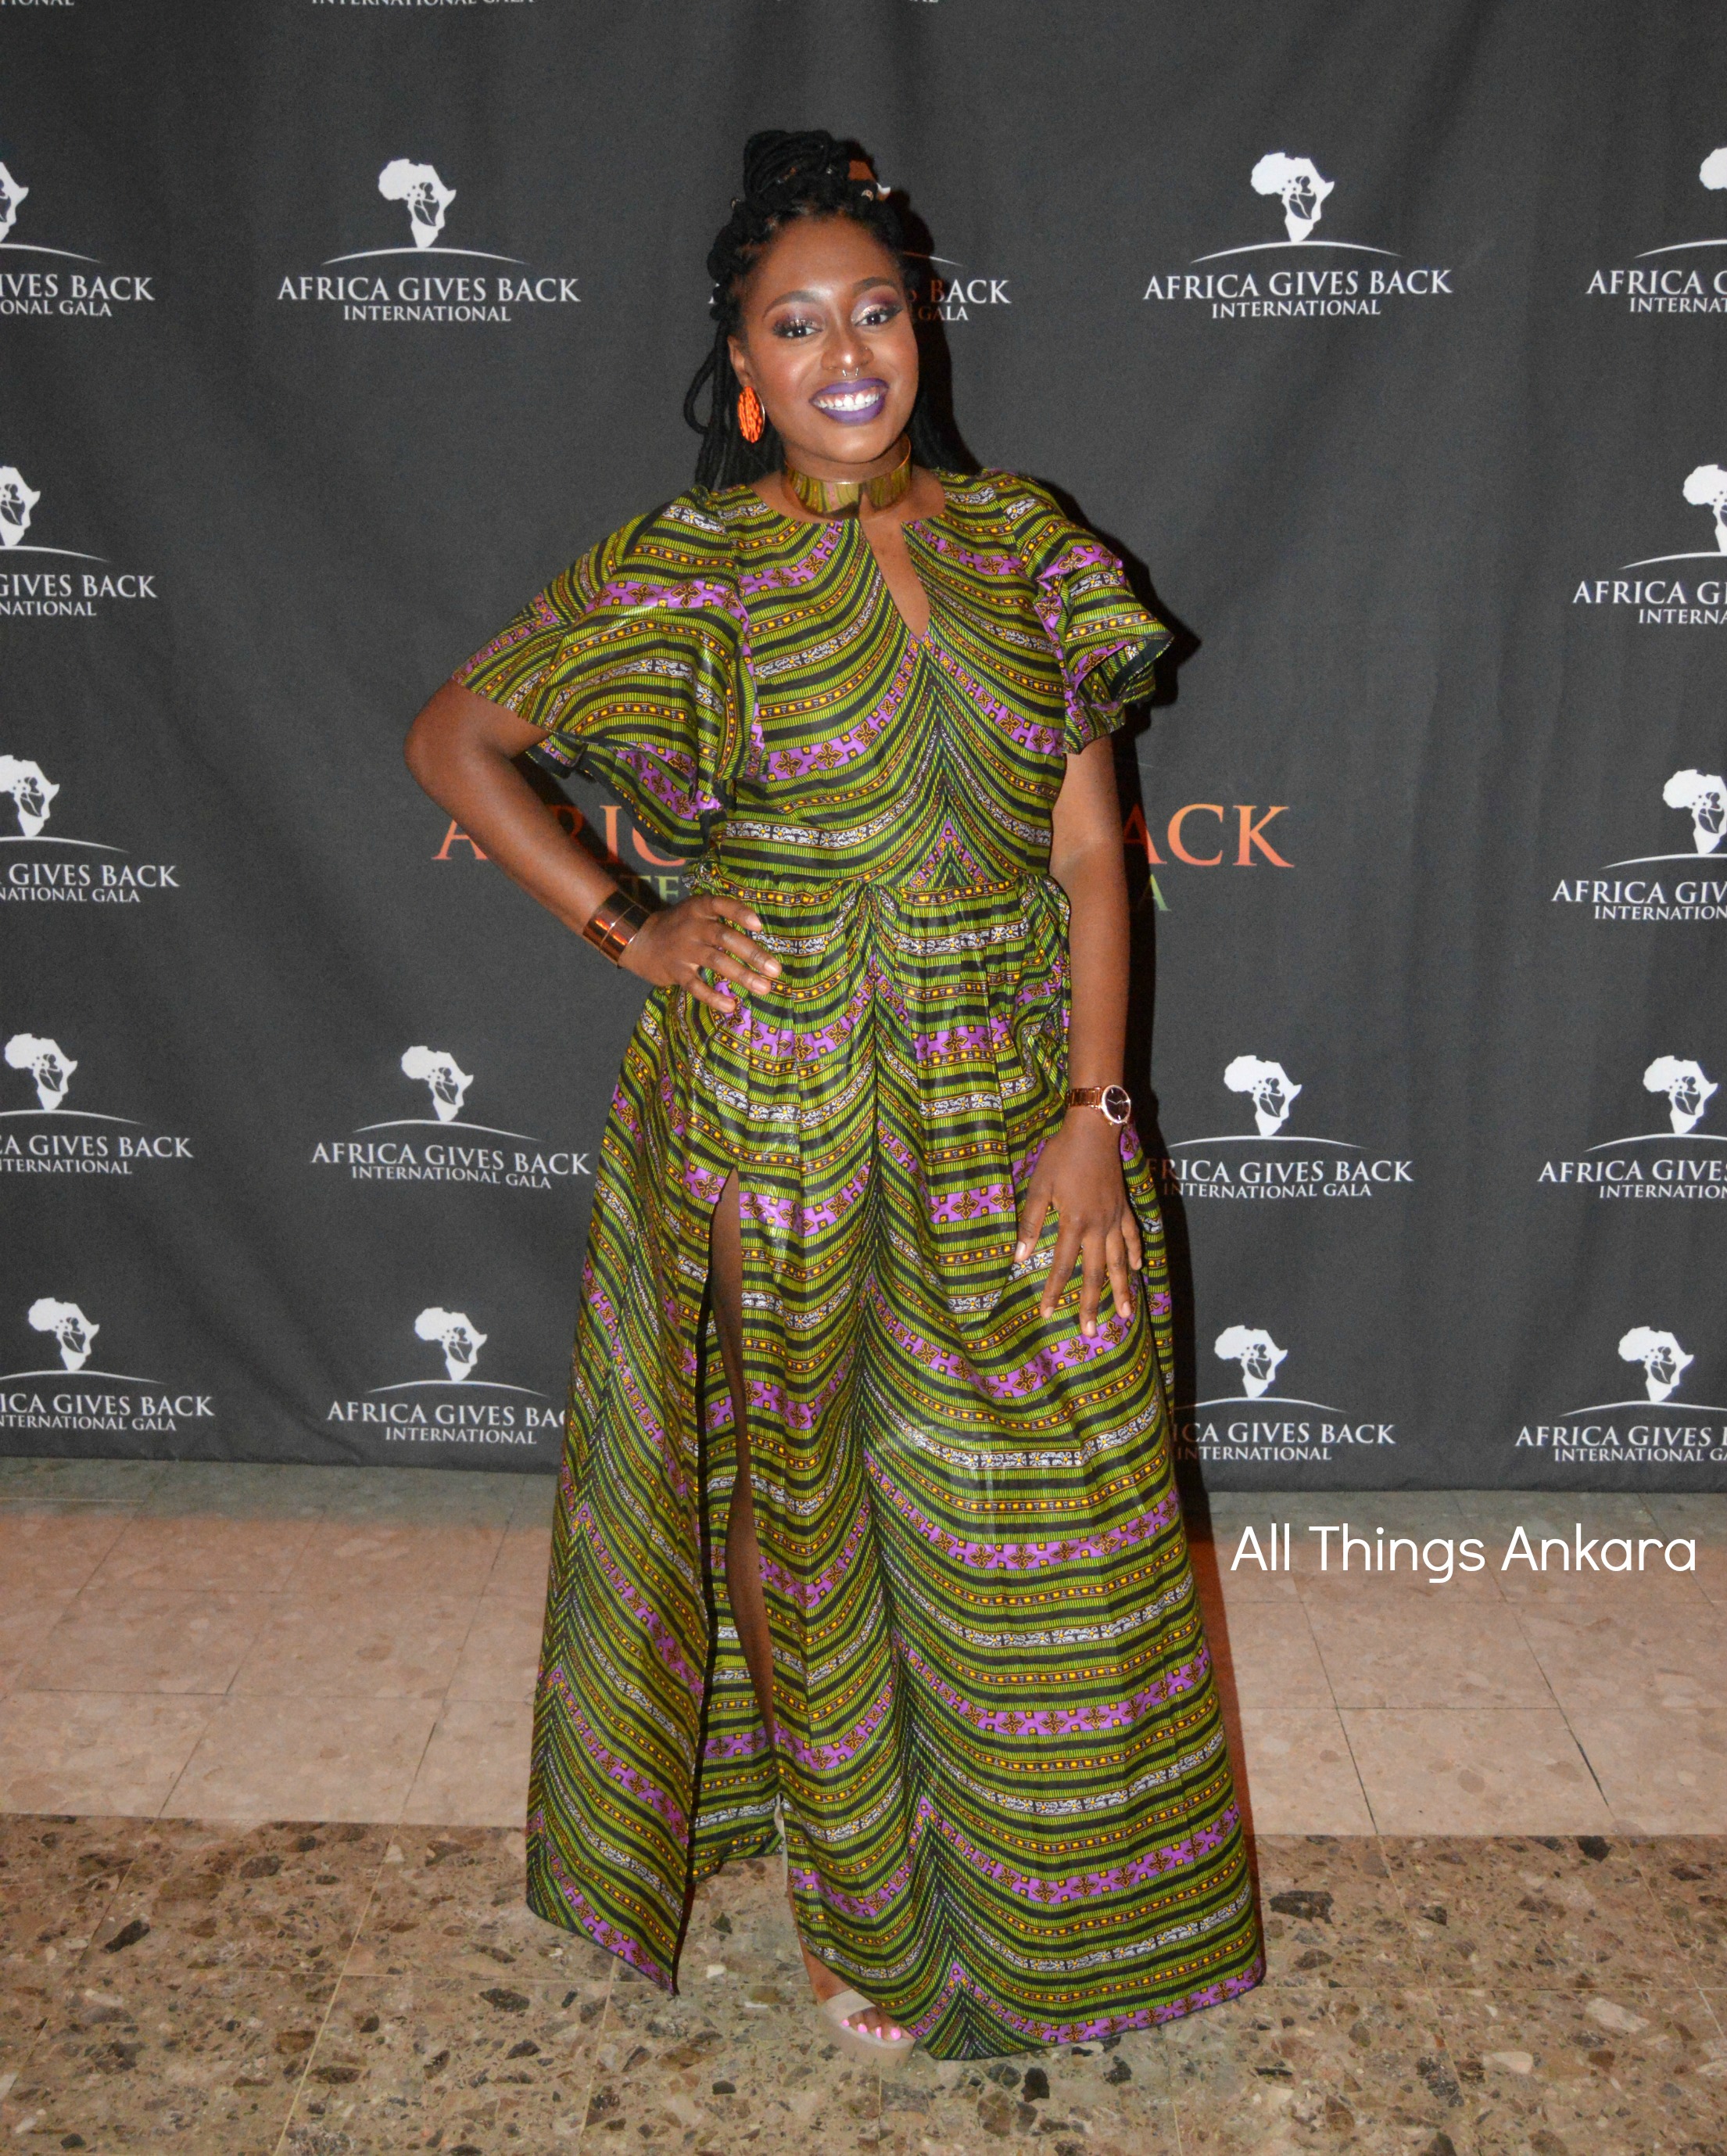 Gala-All Things Ankara's Best Dressed Women at Africa Gives Back International Gala 2016 7